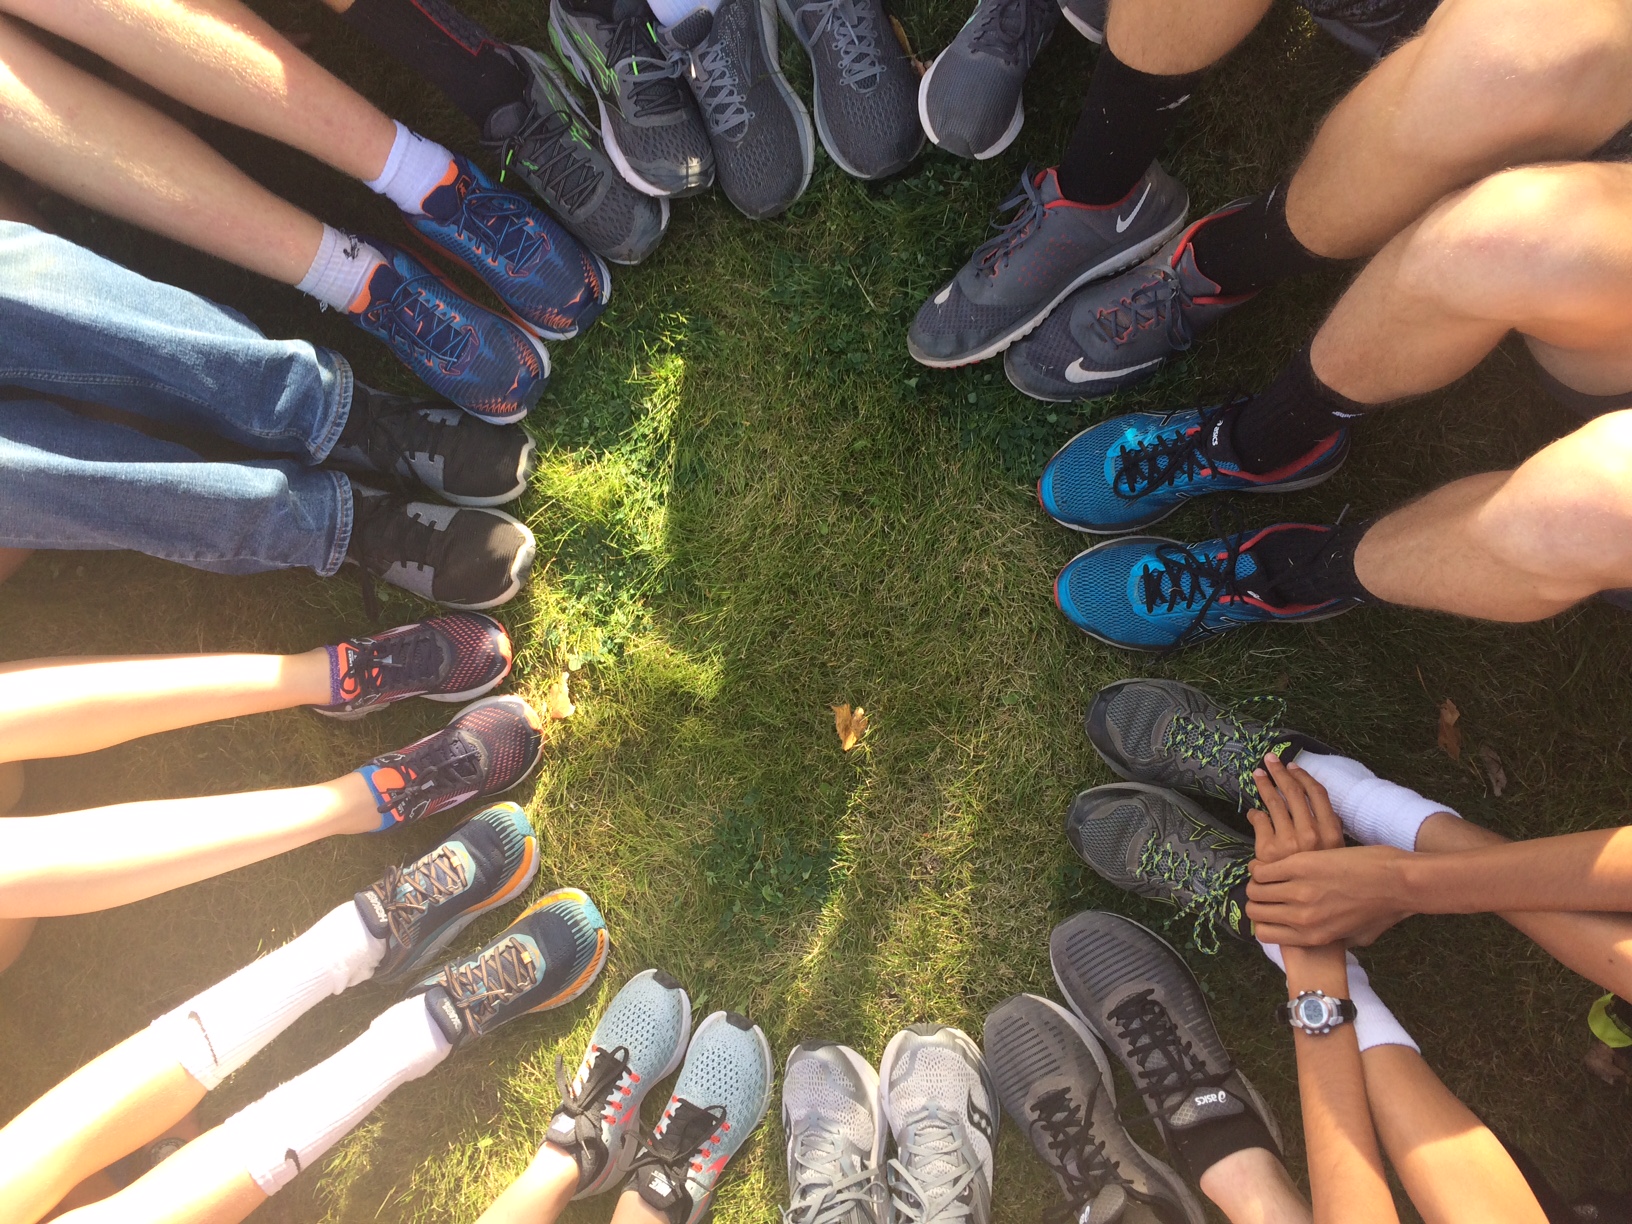 A photo of a circle of feet wearing running shoes of various colors